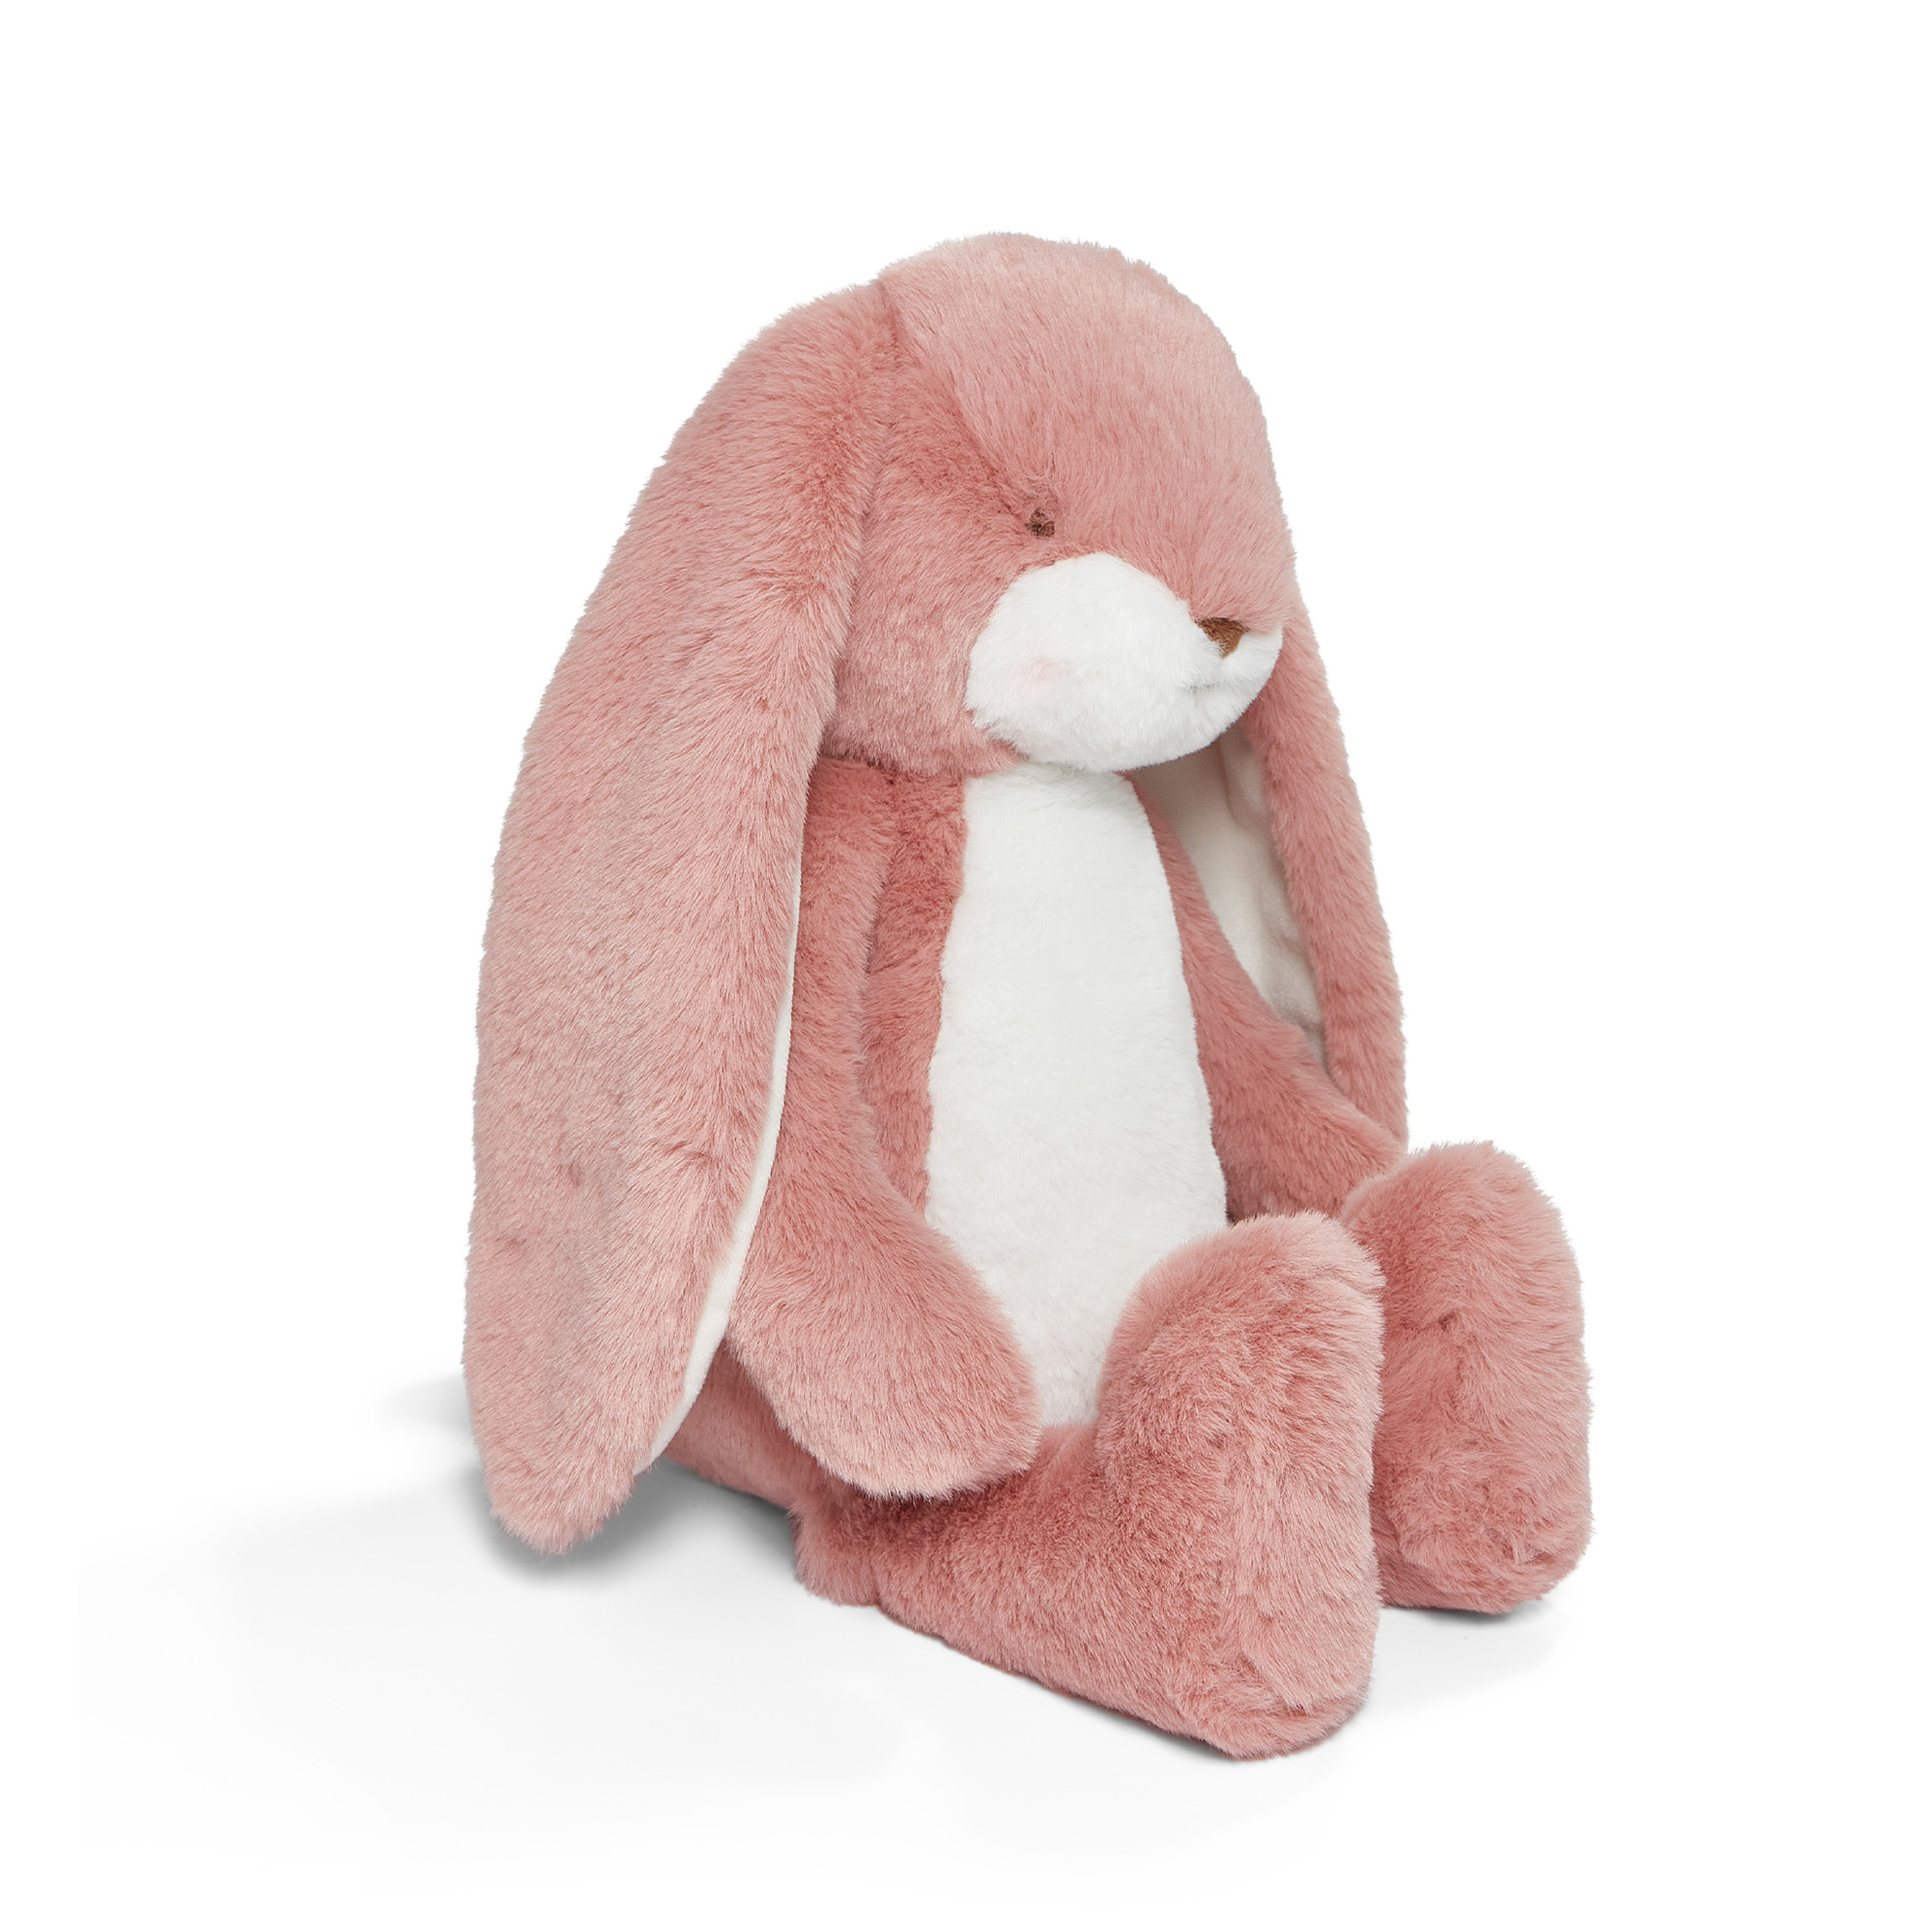 Peluche floppy sweet nibble coral blush 40 cm - Bunnies By The Bay